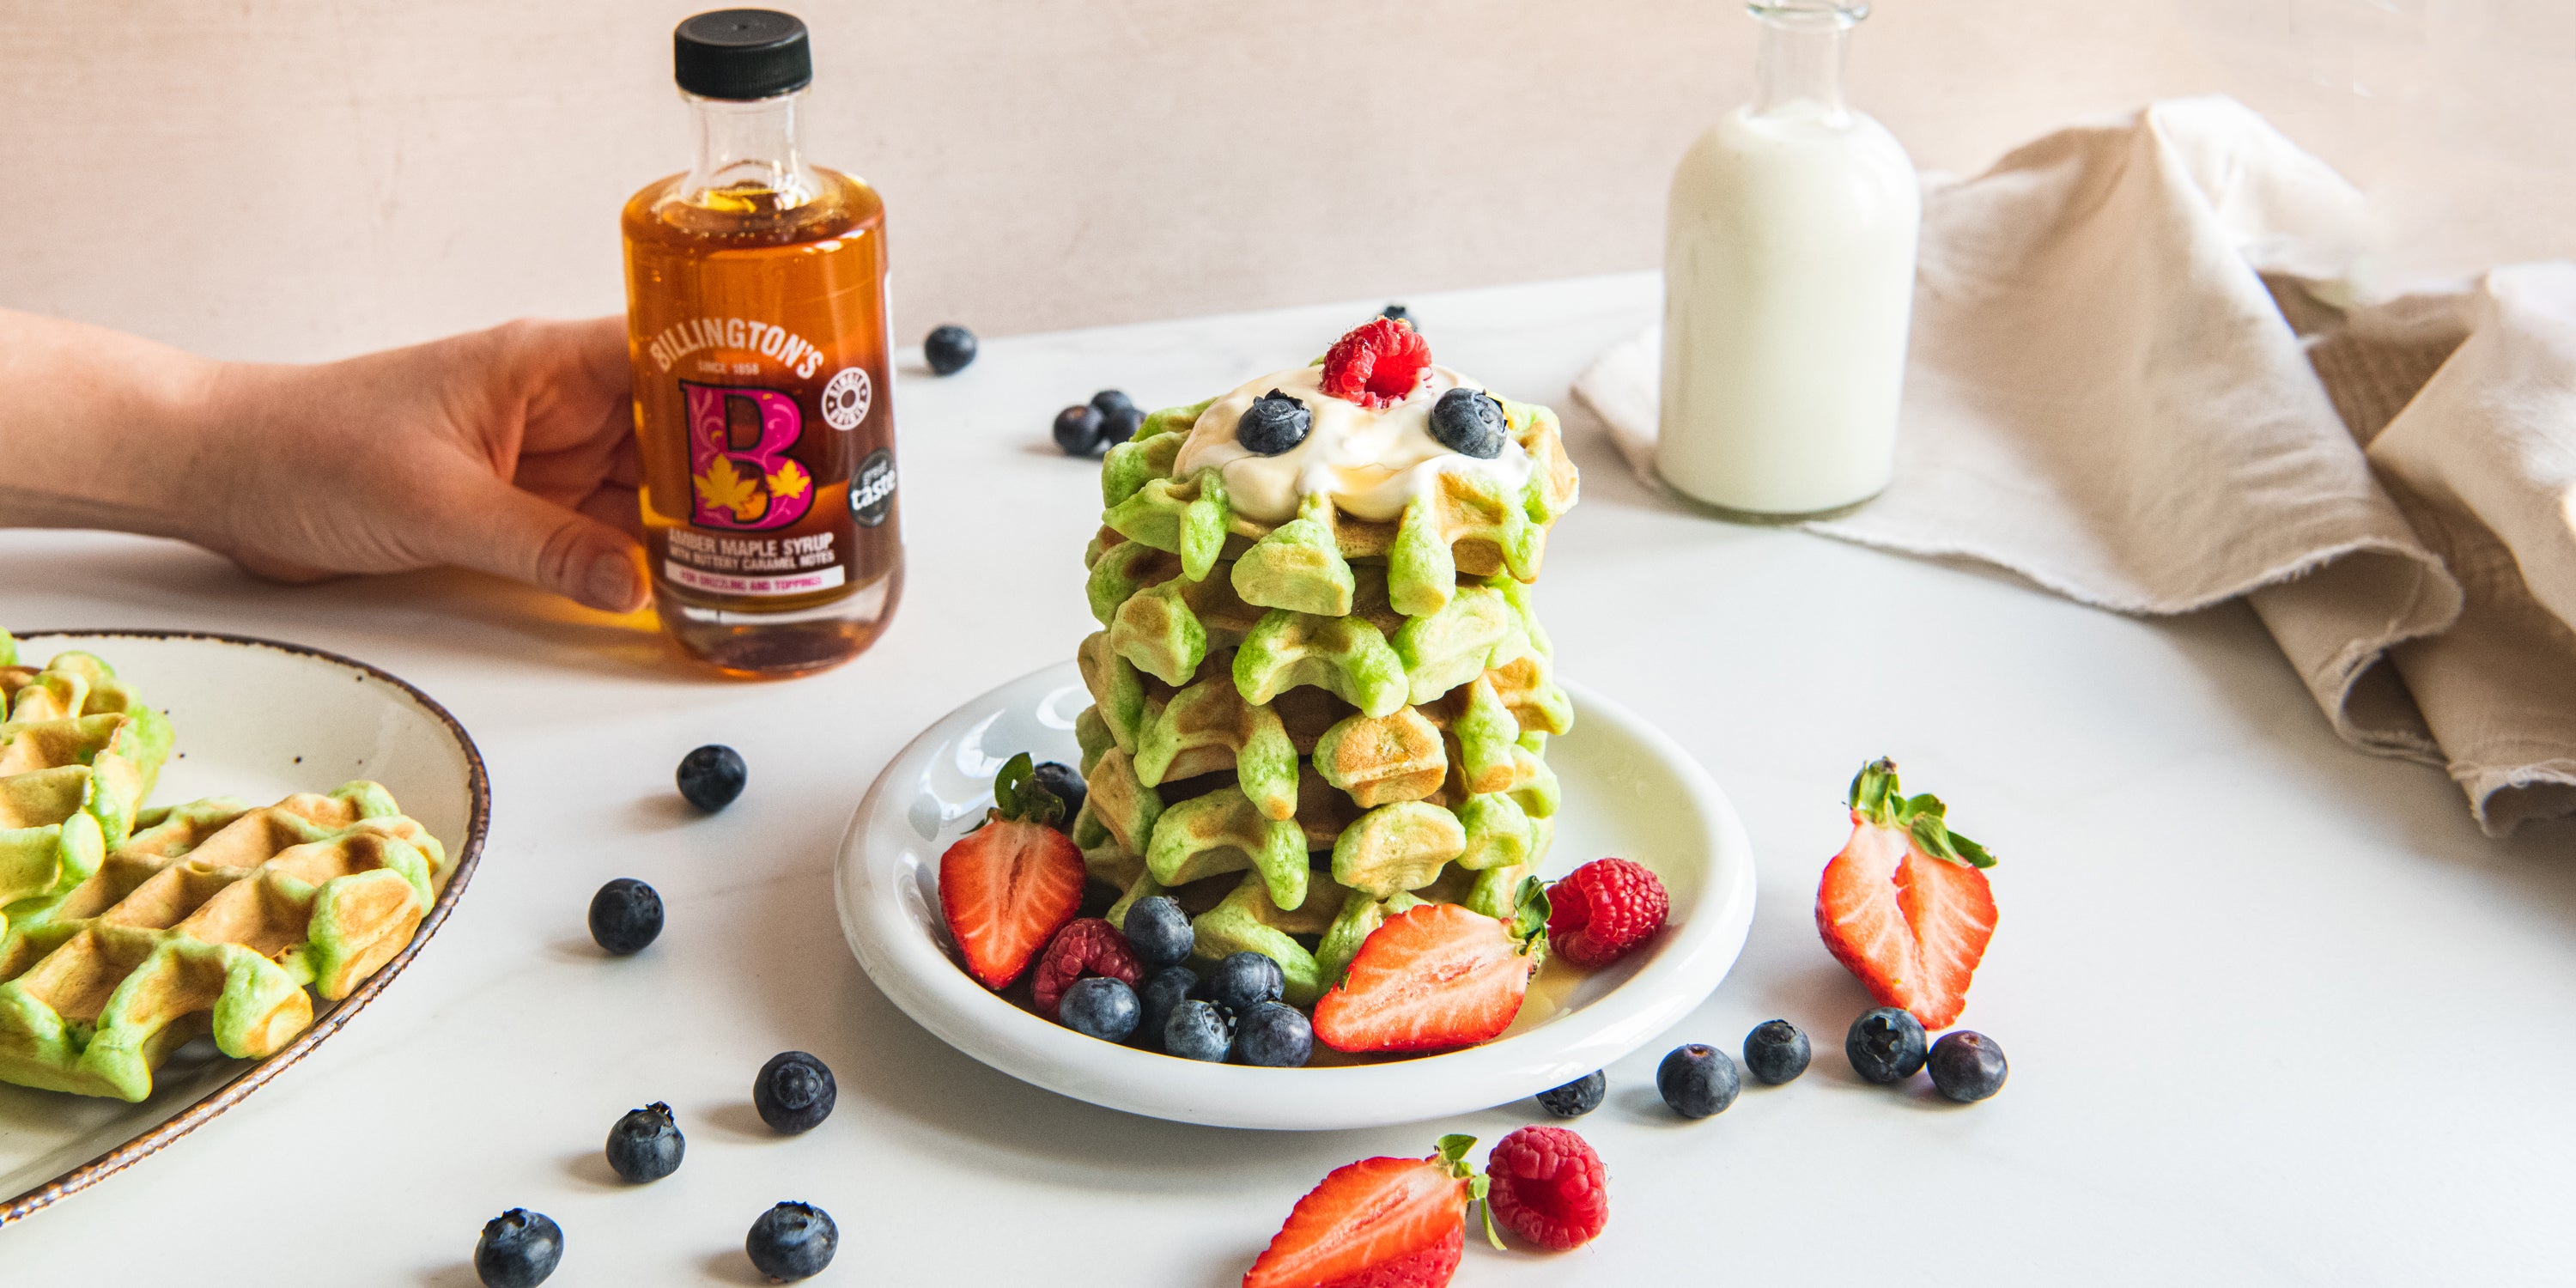 Pandan Waffles stacked with fresh berries, next to a hand holding a bottle of Billington's maple syrup and scattered blueberries